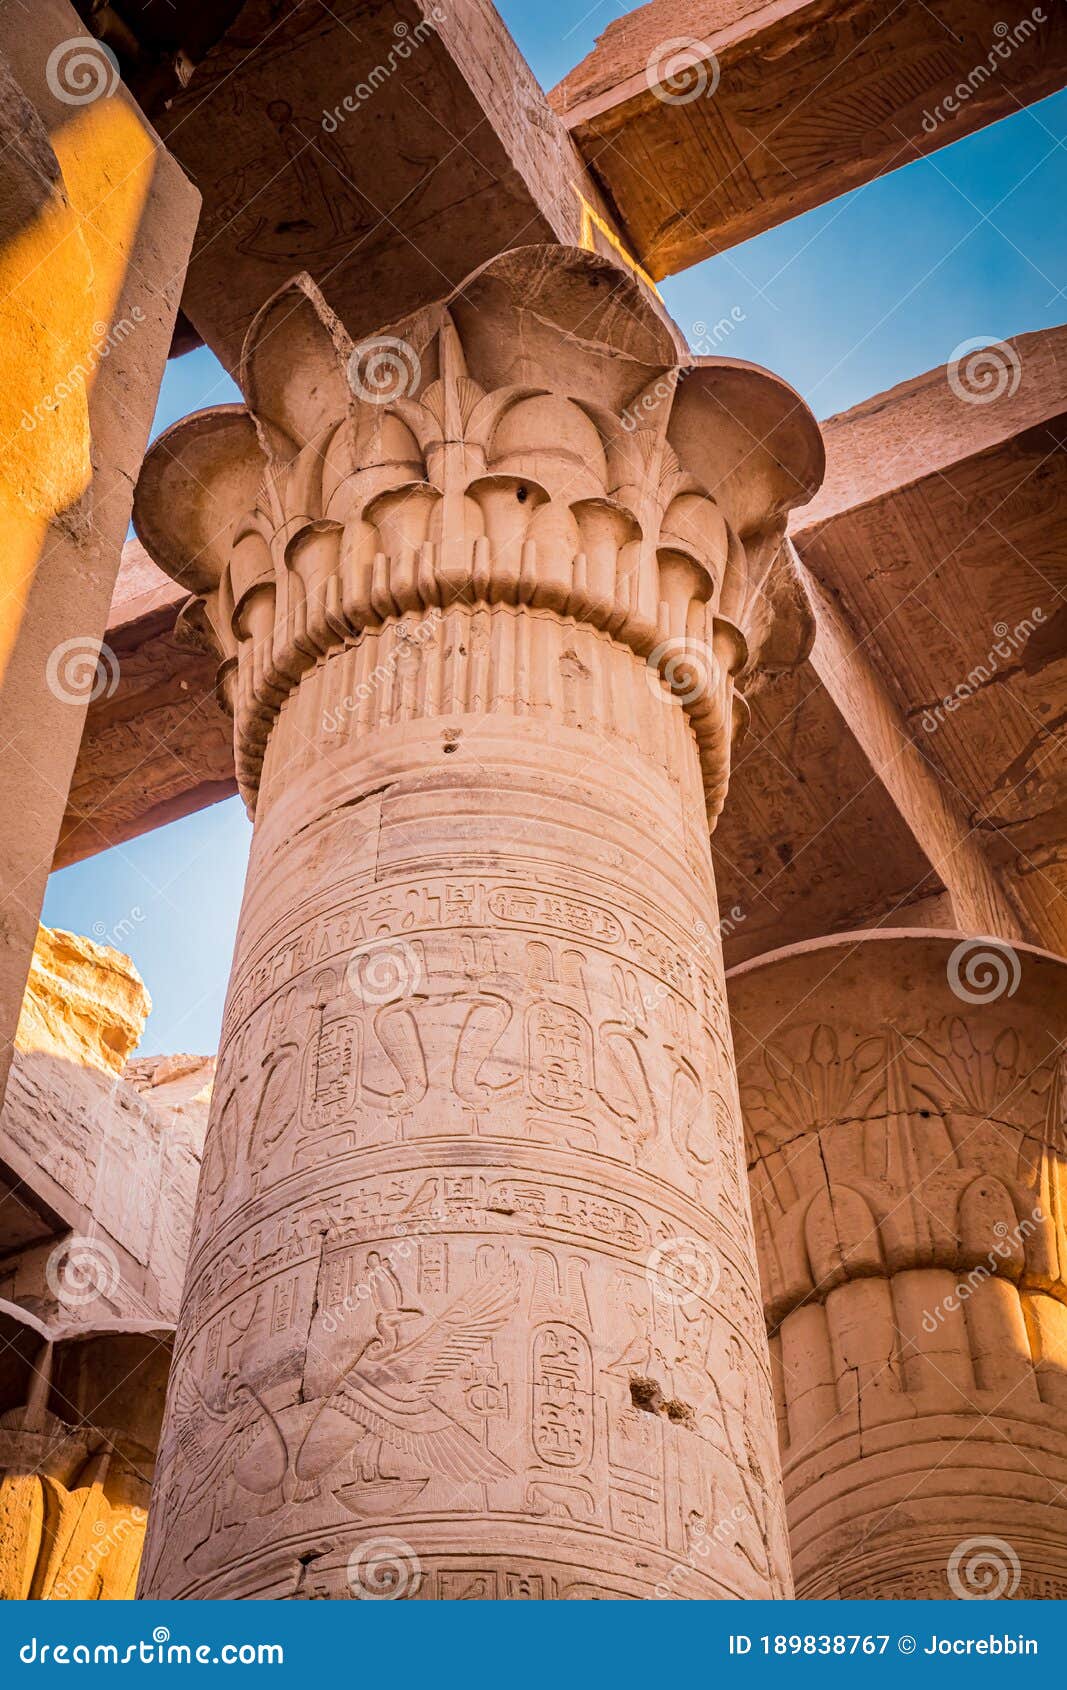 vintage lotus flower decorates the top of the columns at kom ombo temple